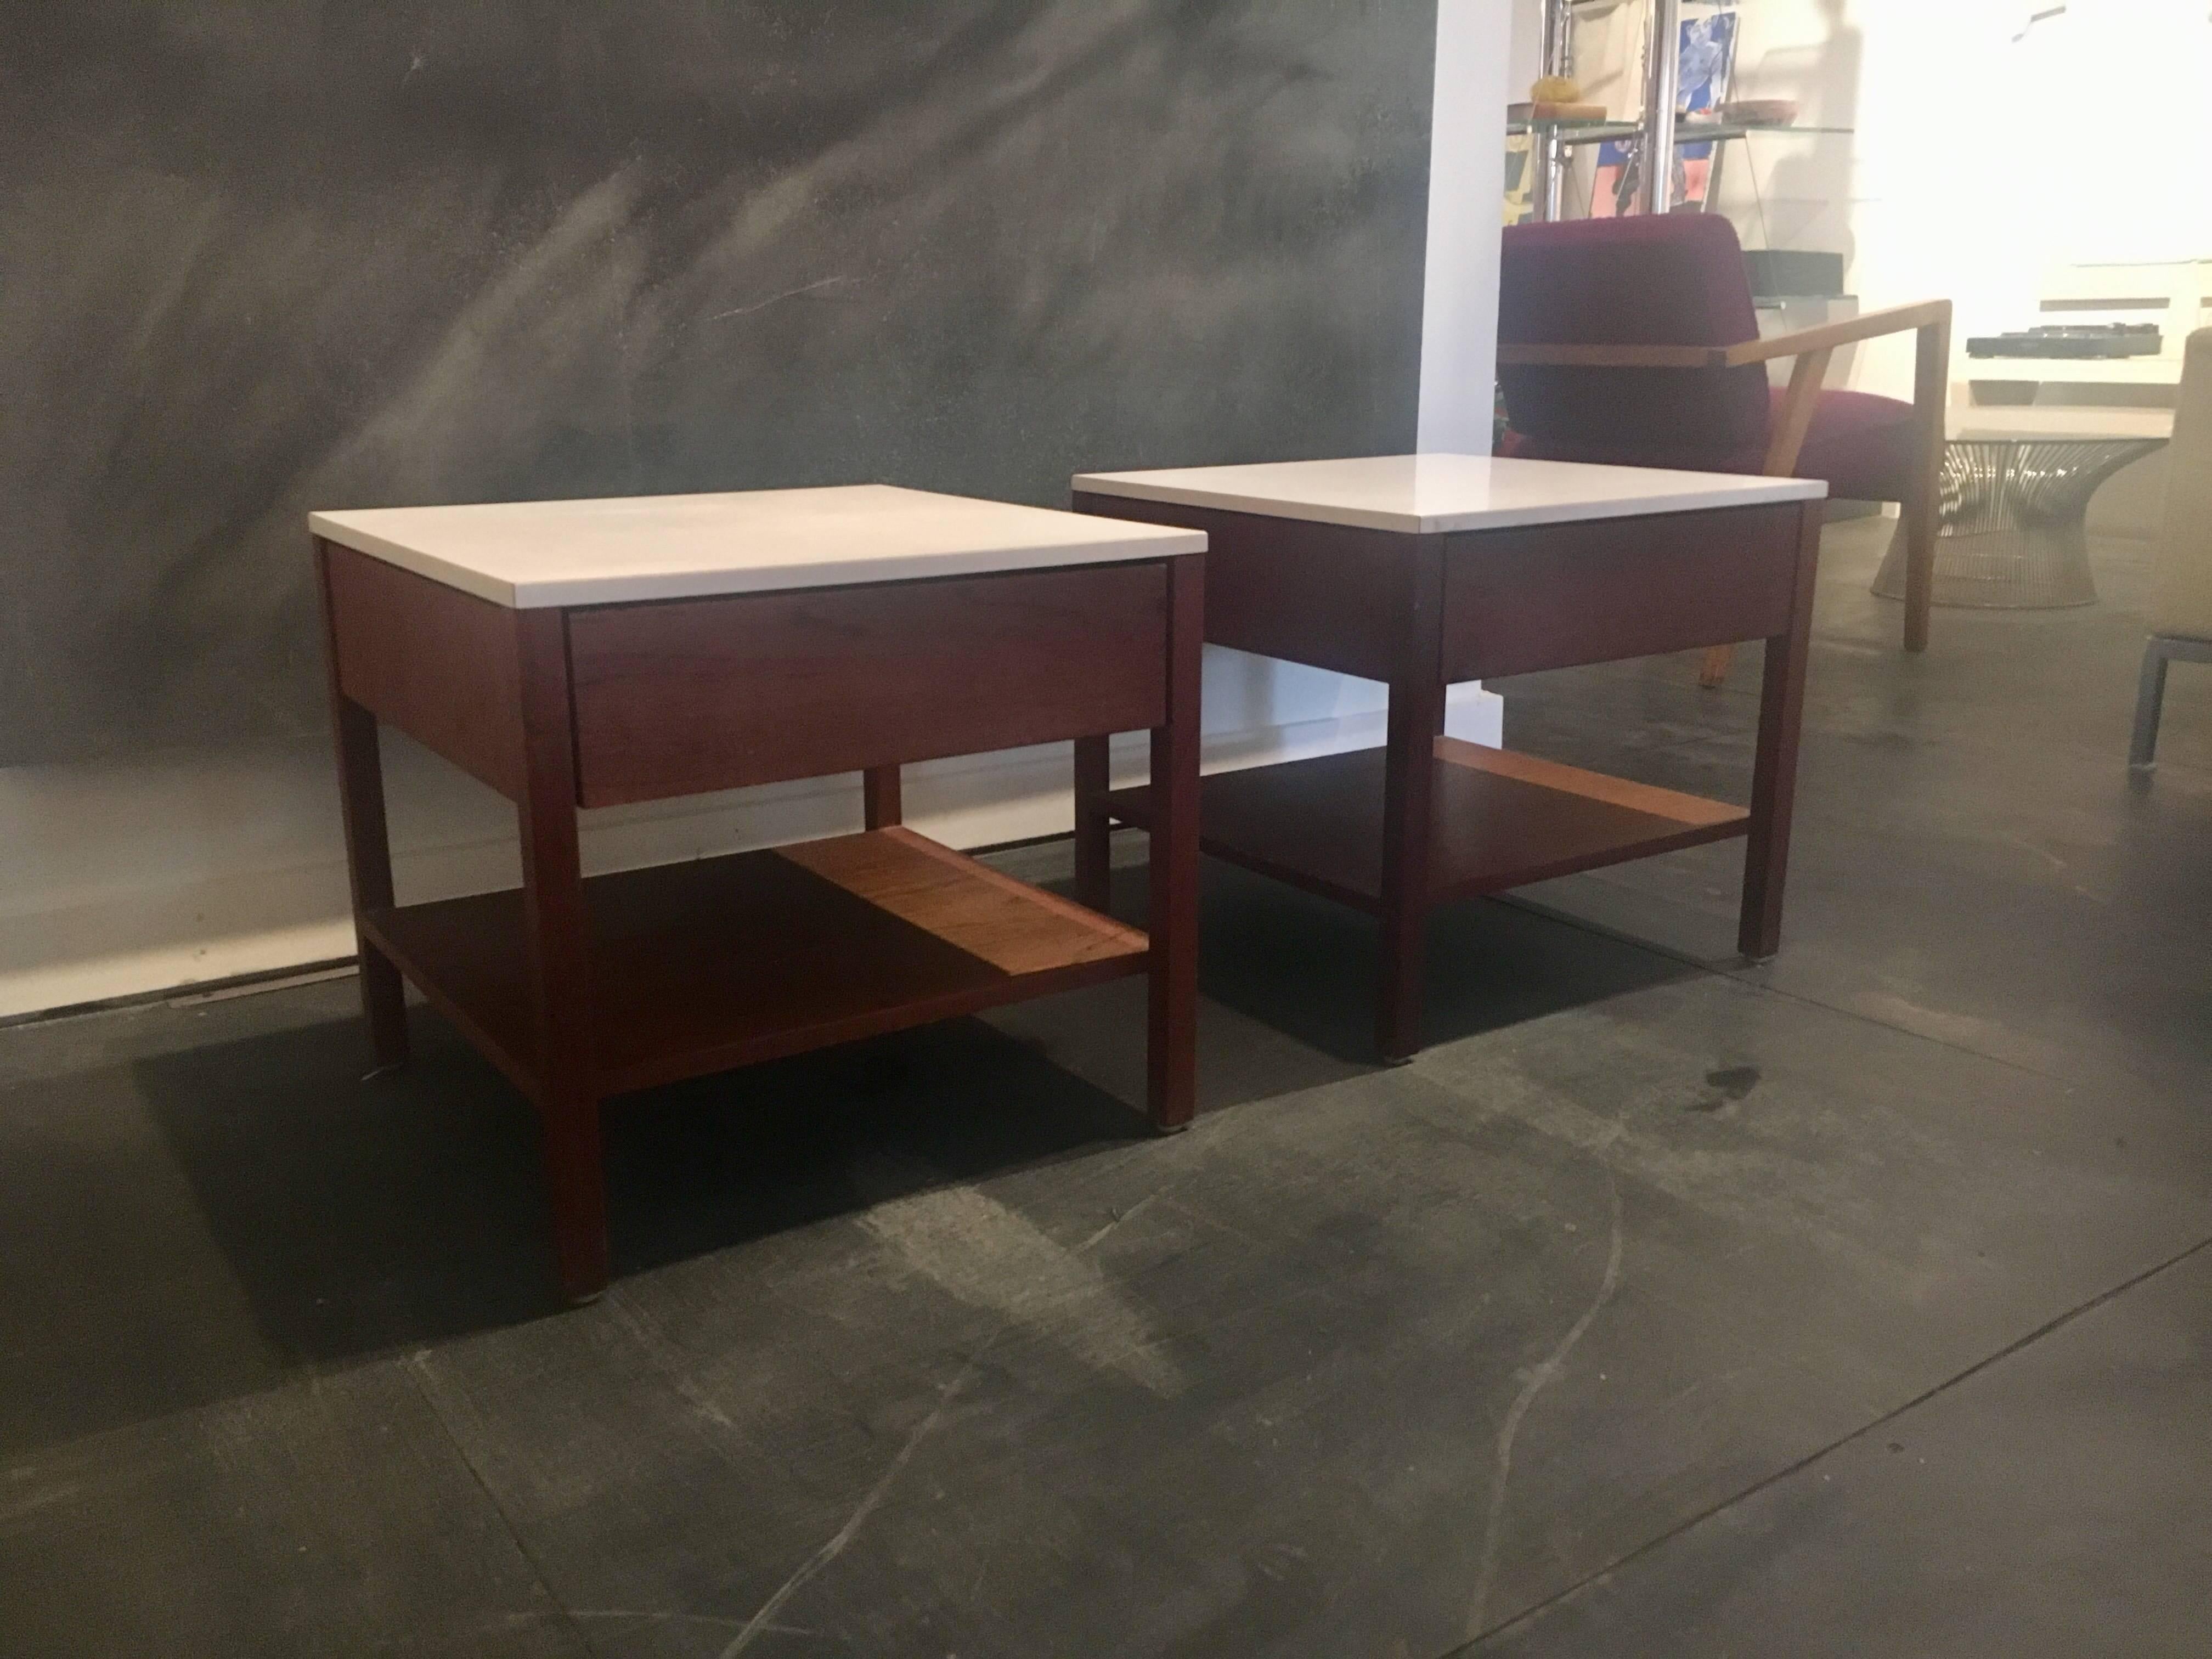 Pair of walnut end tables or nightstands designed by Florence Knoll, circa 1959, manufactured by Knoll.
White laminate tops.